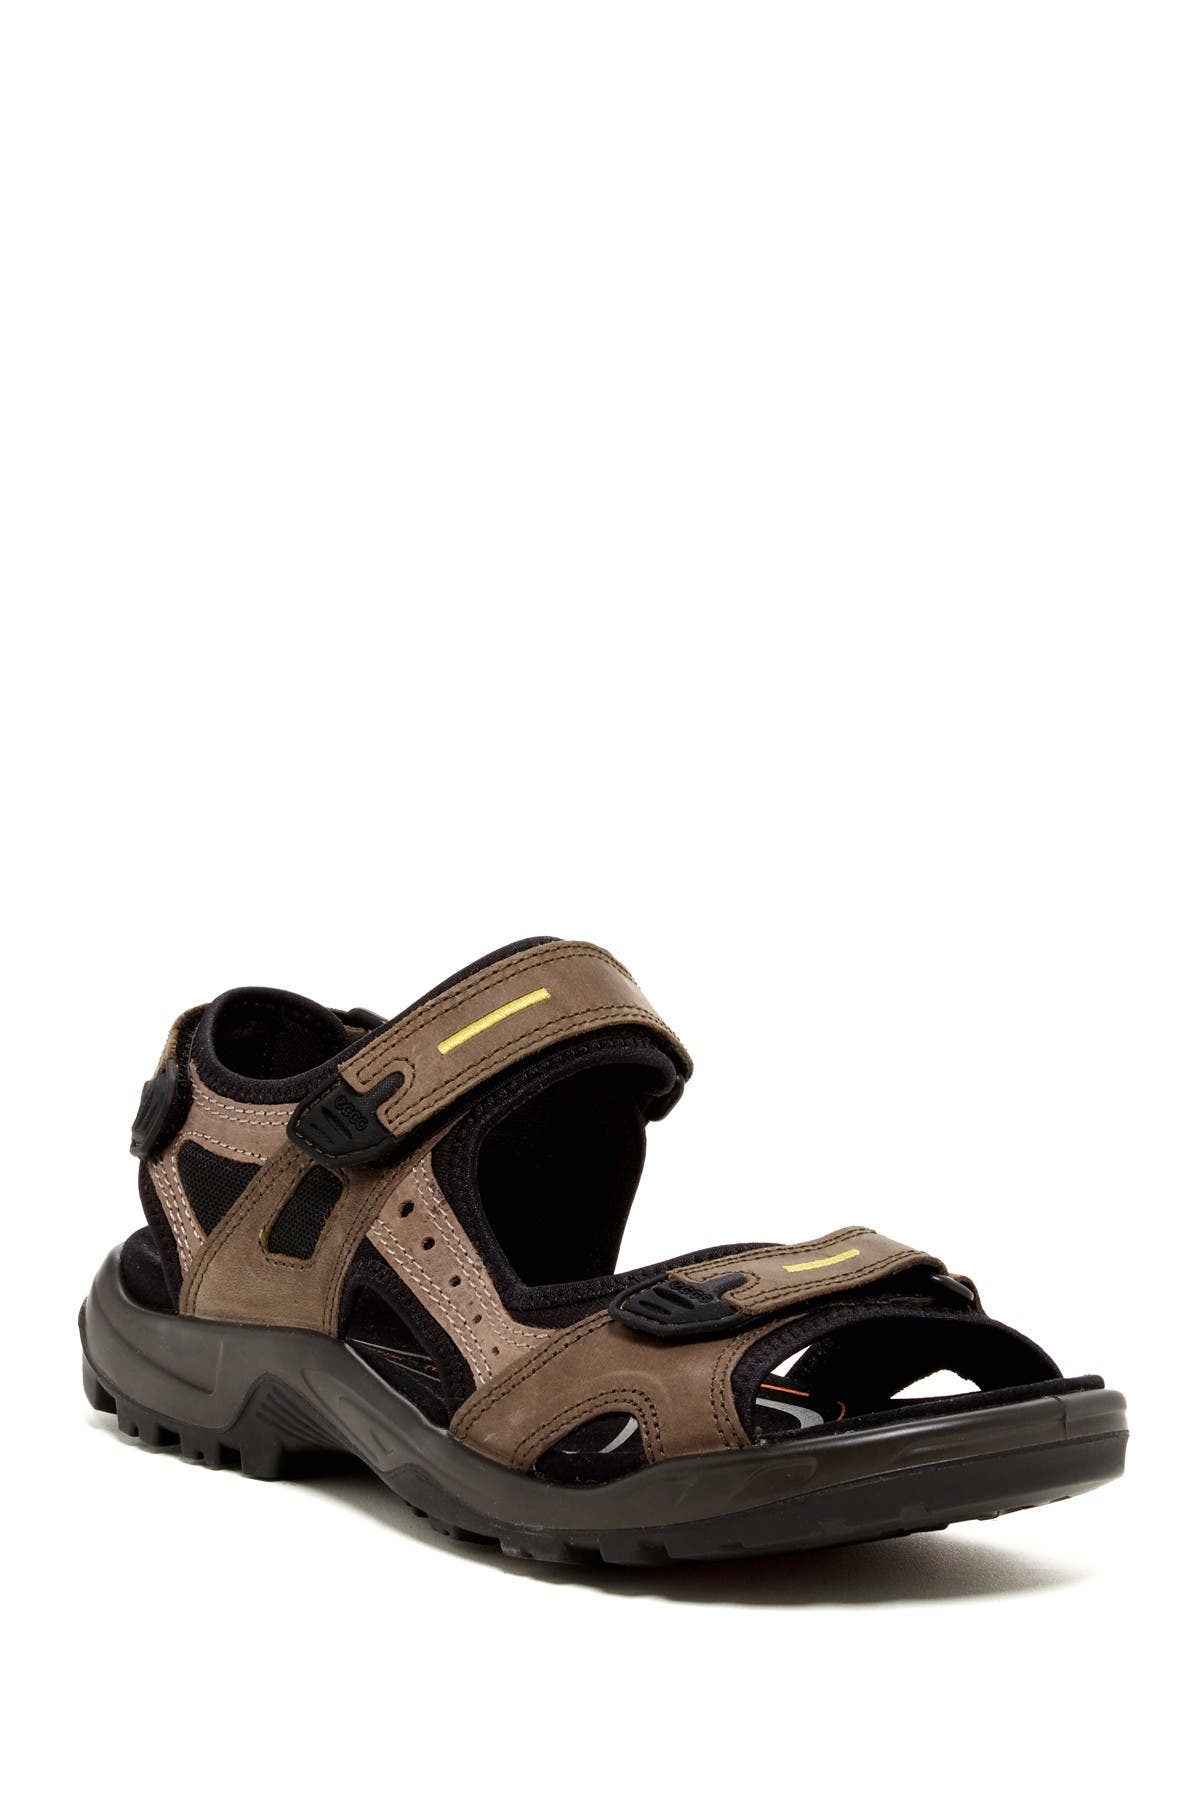 ecco arch support sandals